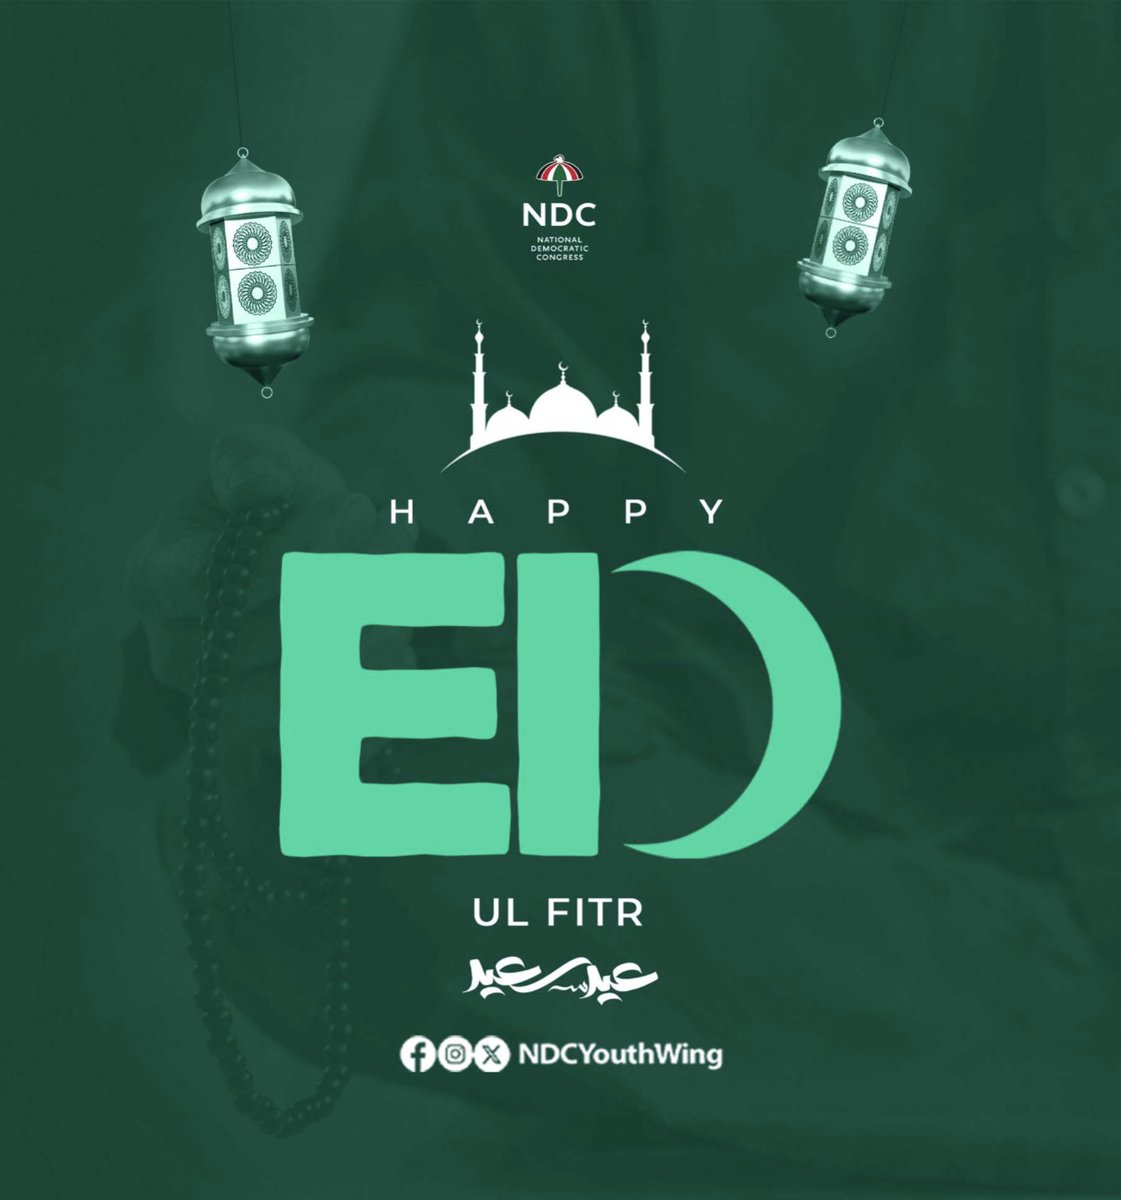 On this special occasion of Eid, I express my sincere appreciation to our Muslim community for their prayers for us, our country, and our welfare. May Allah accept our devotion and bestow His blessings upon all of us. Wishing everyone a happy Eid! #YouthPower #TheGhanaWeWant…